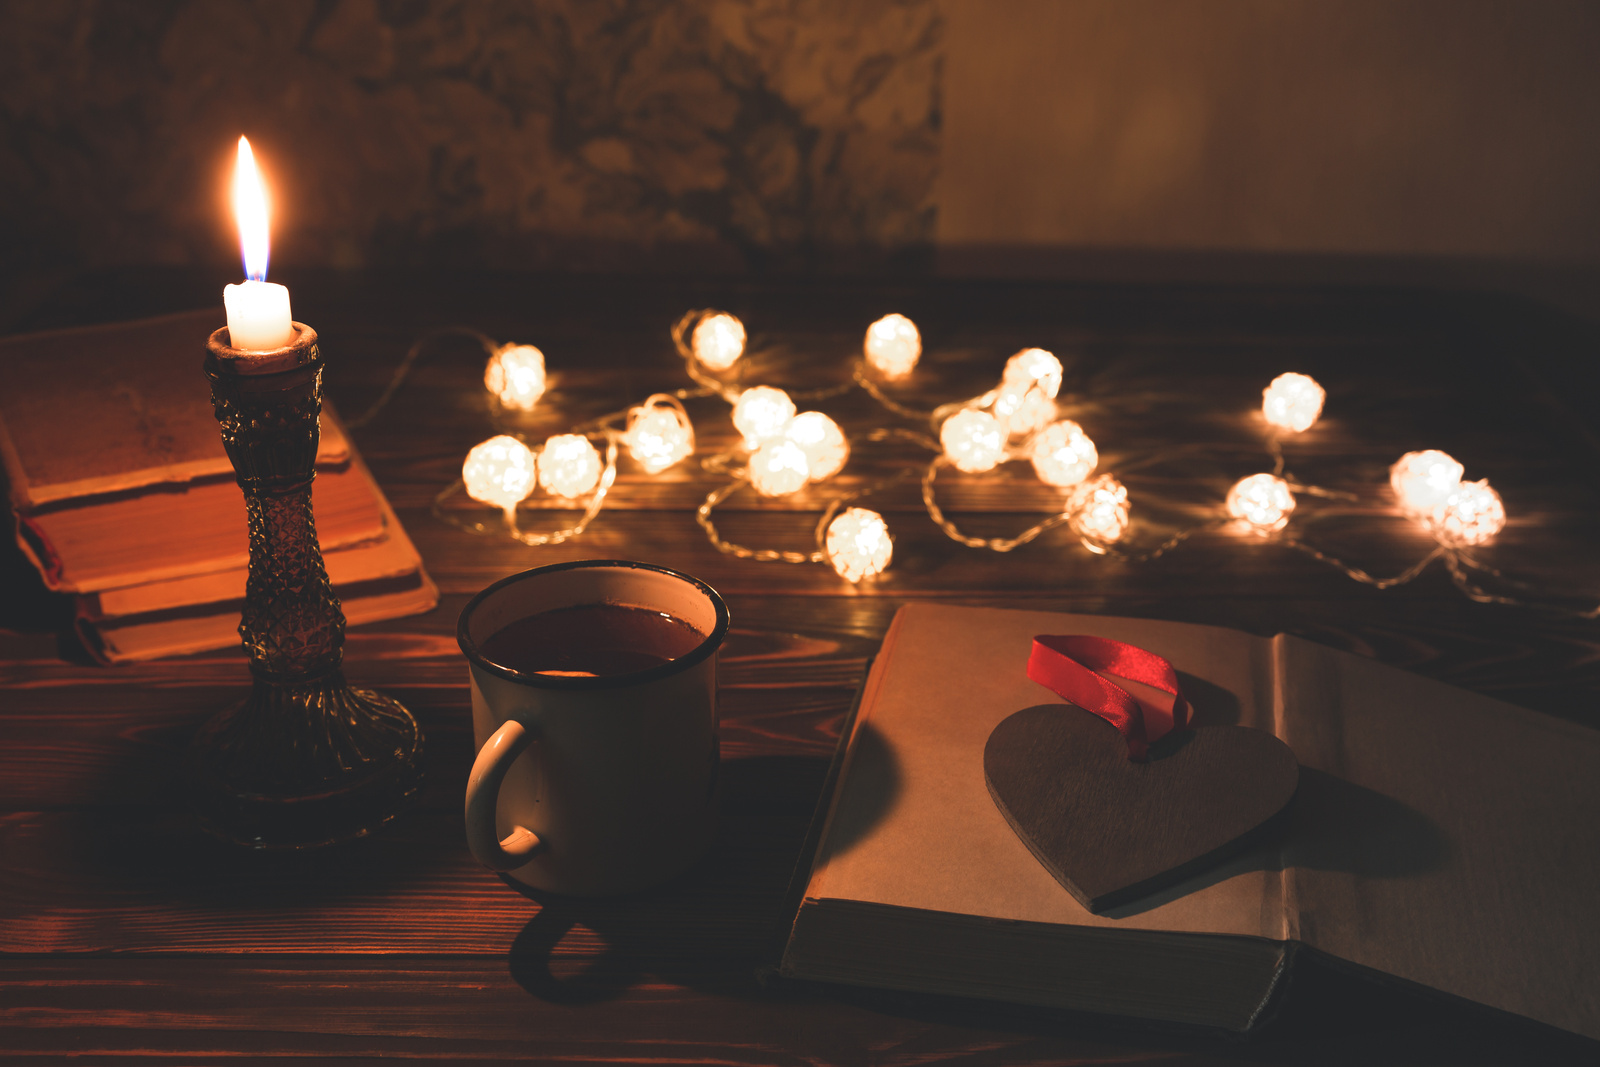 Book and hot tea mug for cosy evening. Holidays mood photo with christmas lights. Wooden heart and candle. Hygge concept. Perfect autumn flat lay.